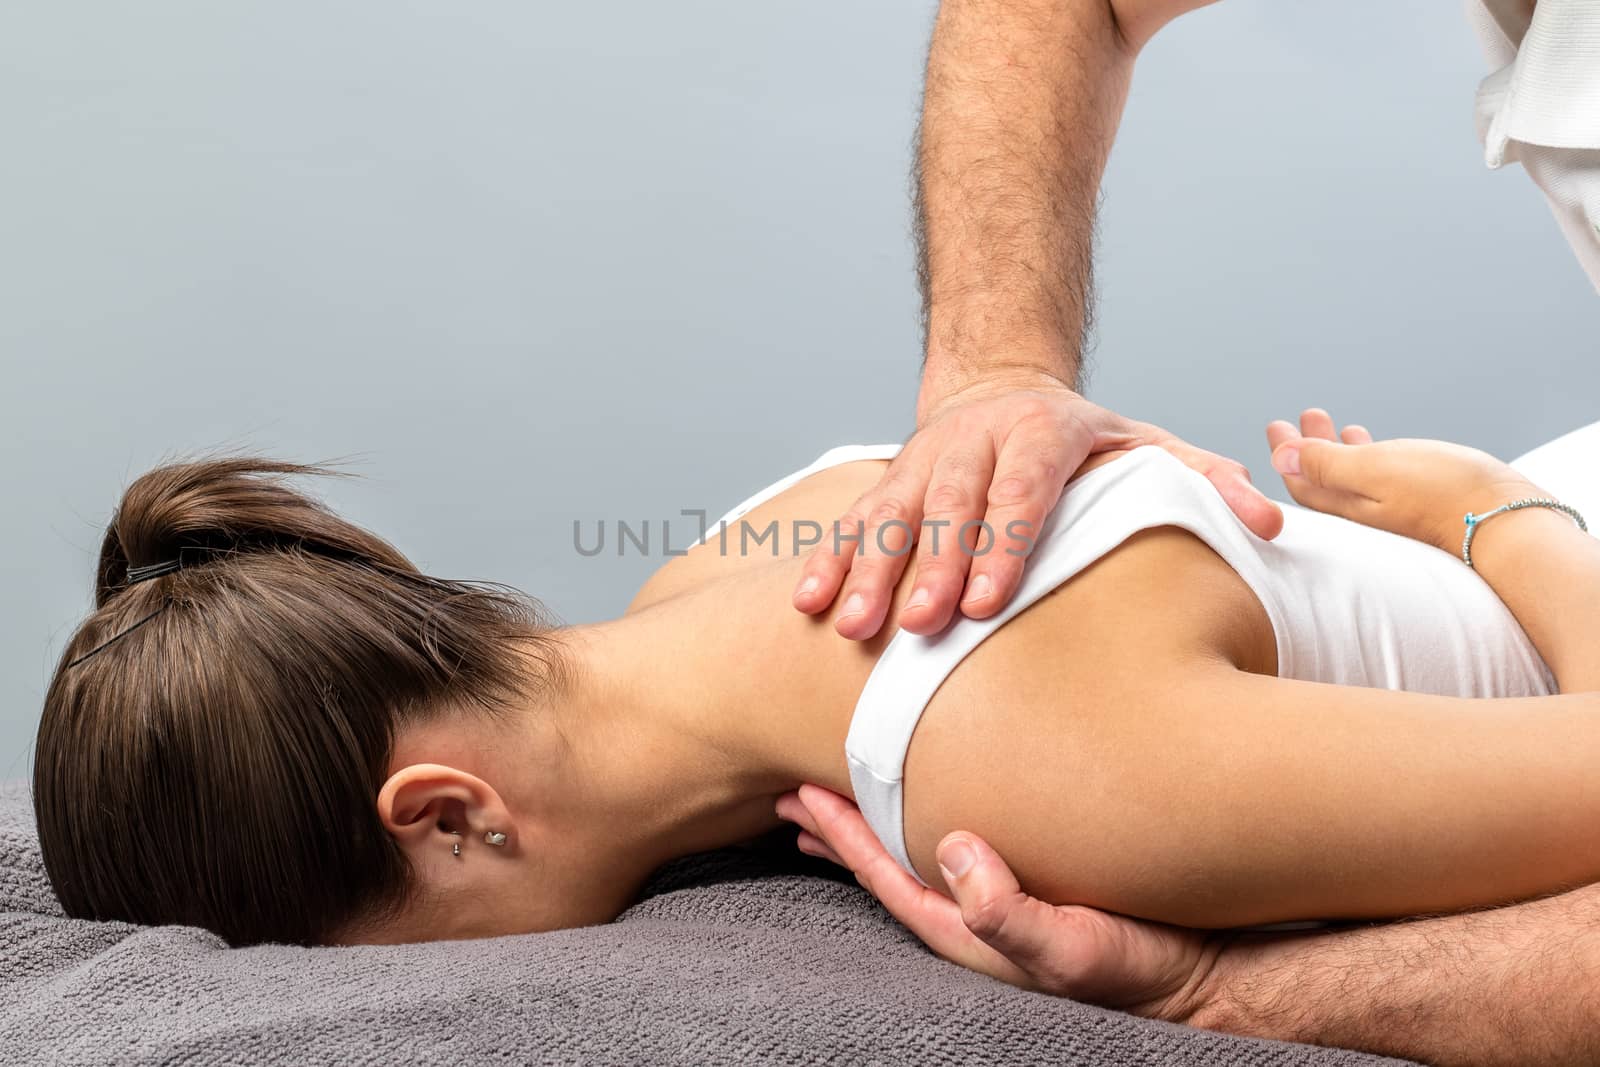 Girl receiving curative osteopathic treatment on shoulder. by karelnoppe